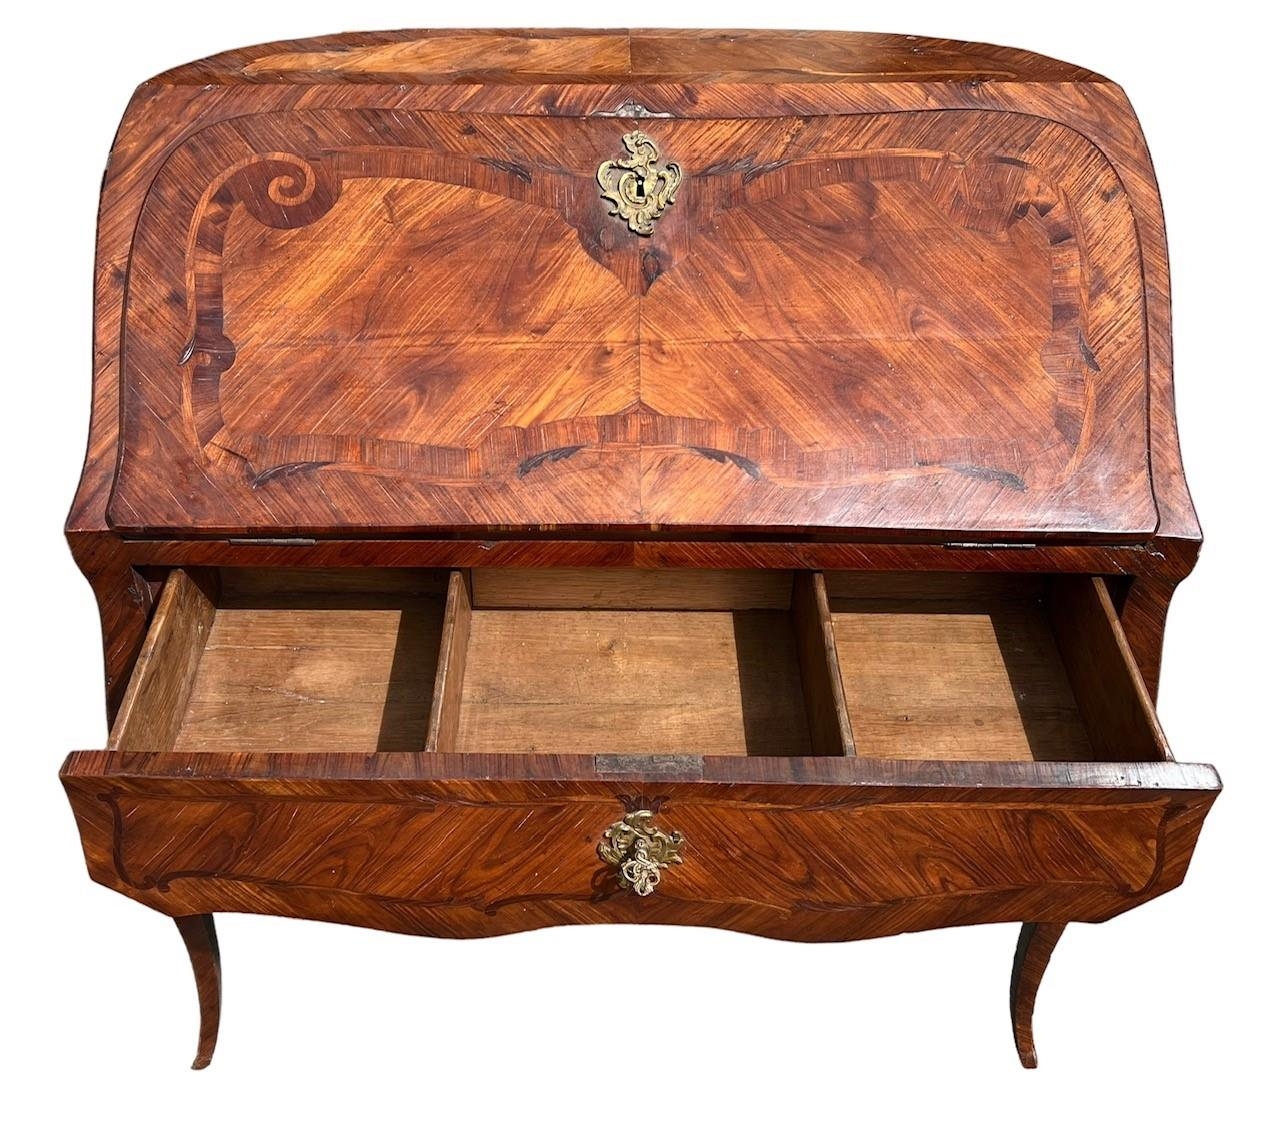 ATTRIBUTED TO FRANÇOIS AND PIERRE GARNIER, AN 18TH CENTURY FRENCH LOUIS XV TULIPWOOD AND INLAID - Image 3 of 11